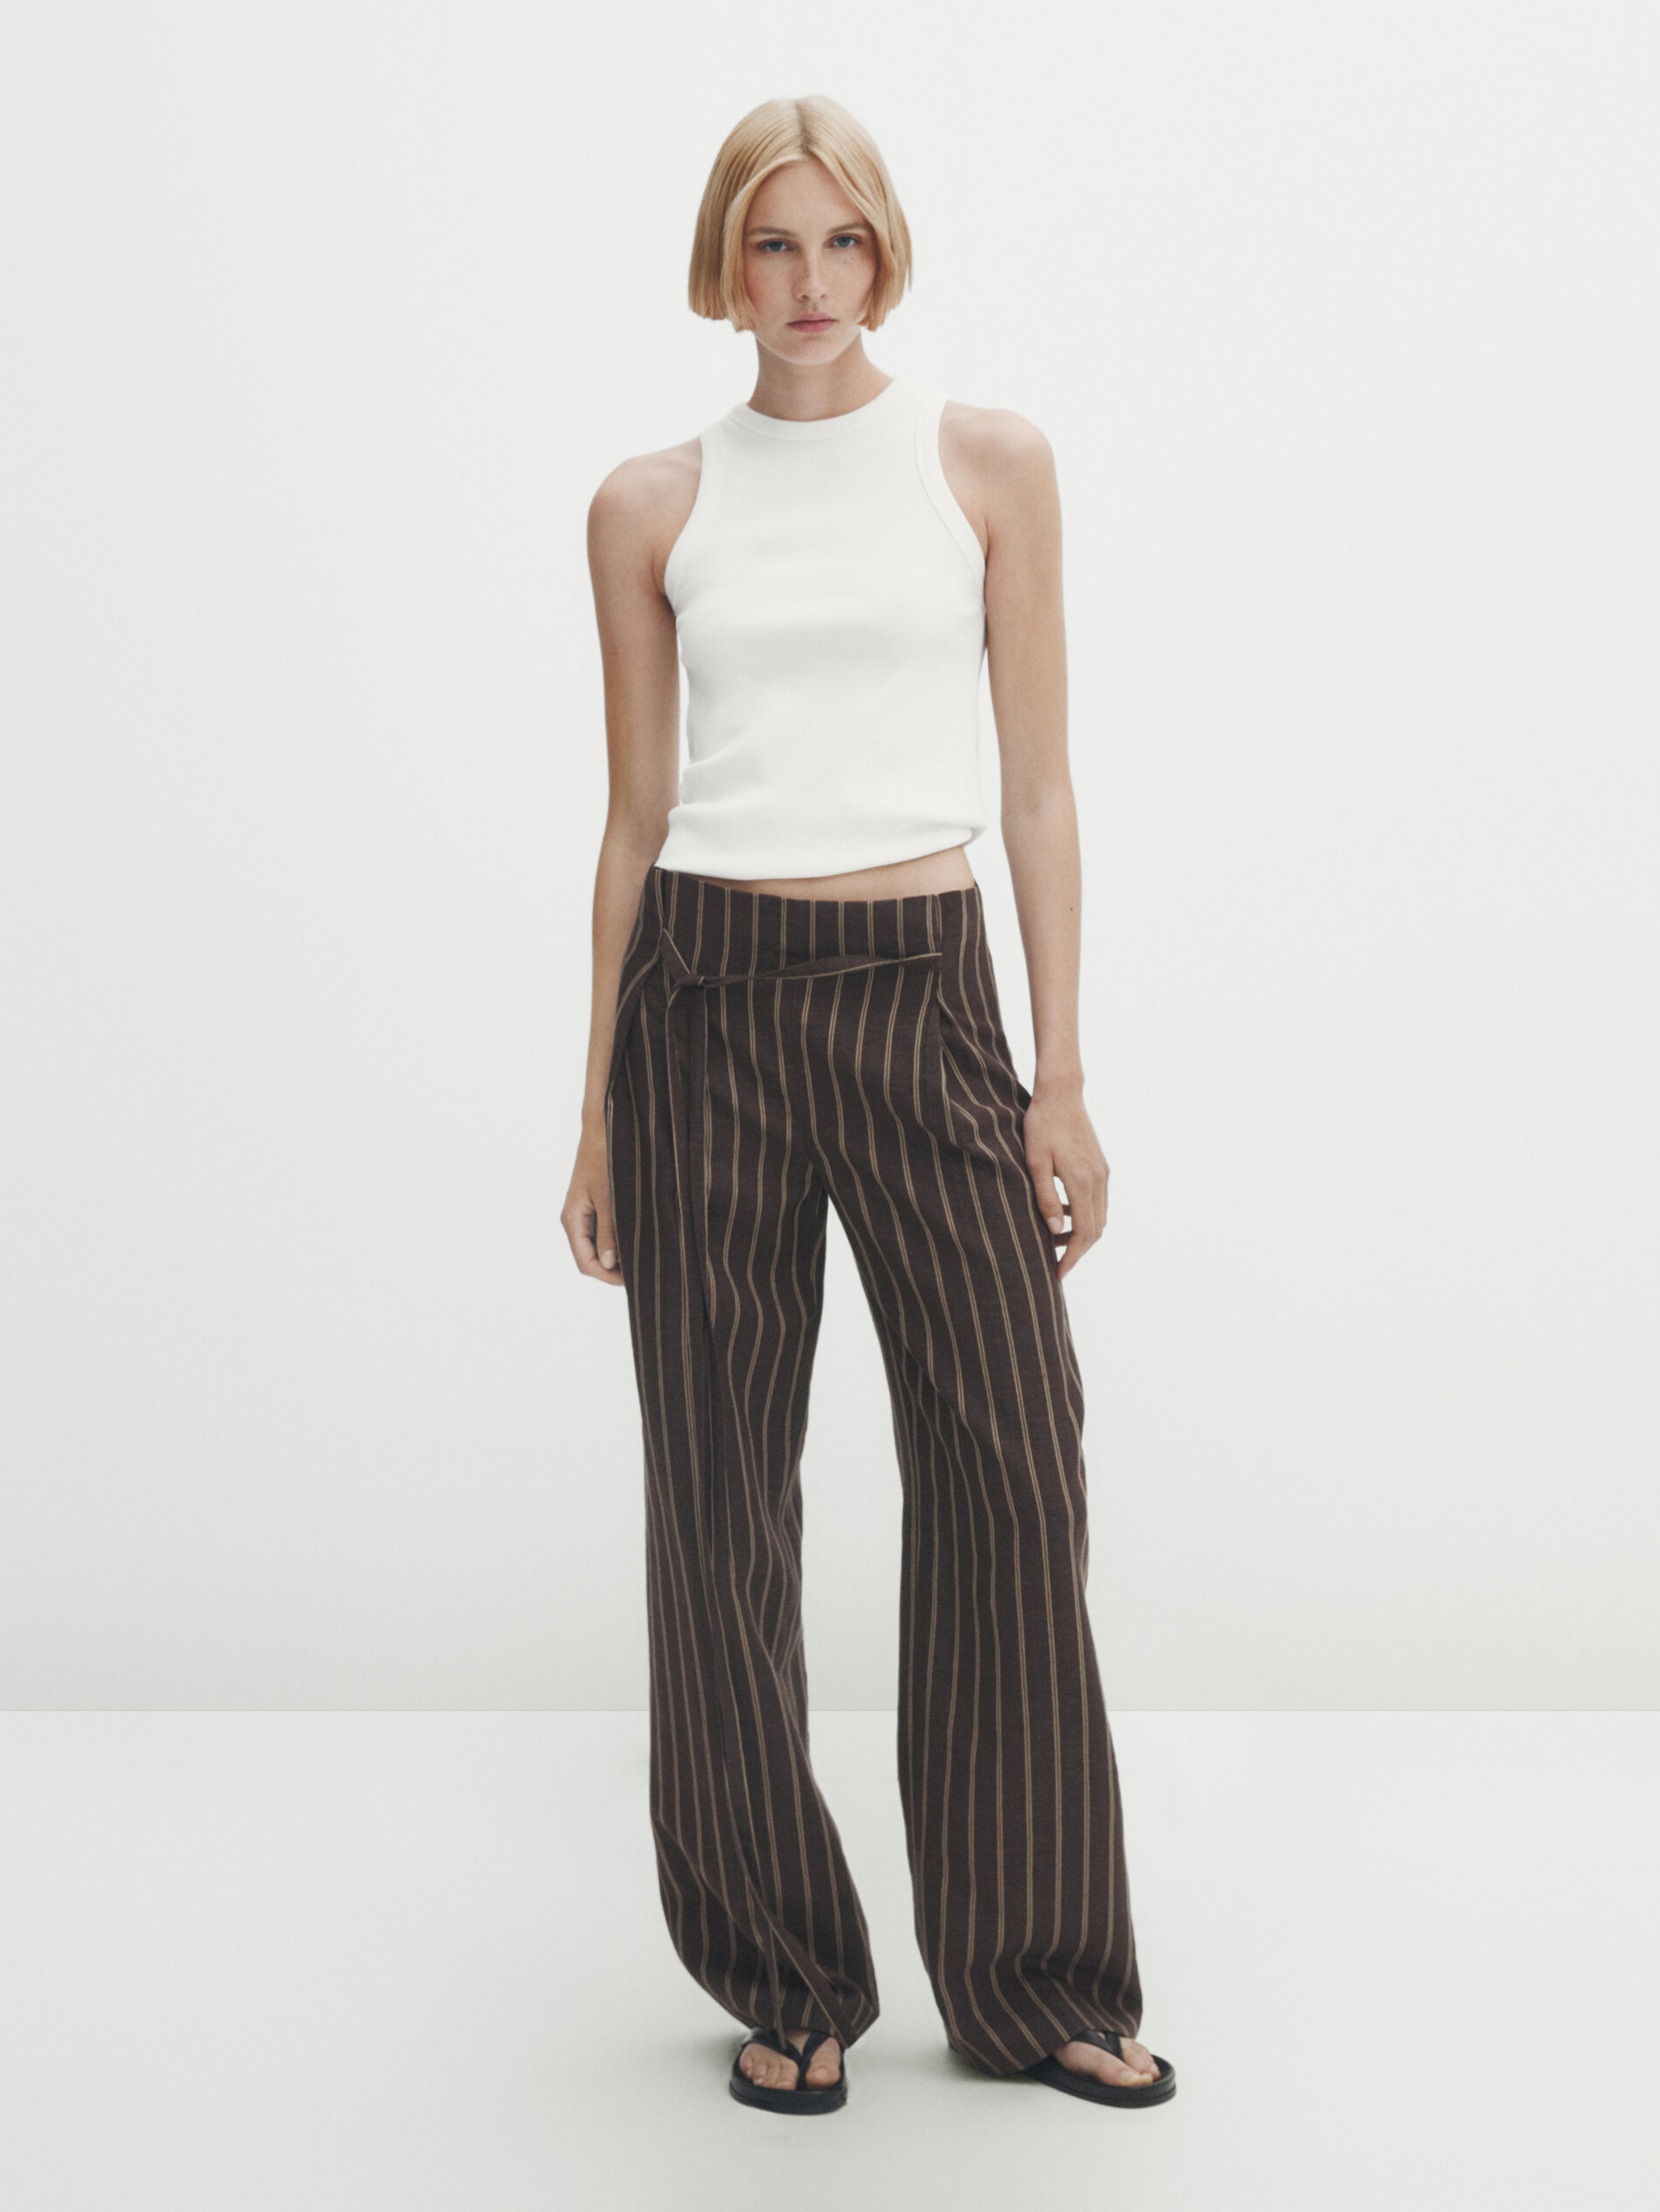 Buy Style Quotient Black  White Striped Trousers online  Looksgudin